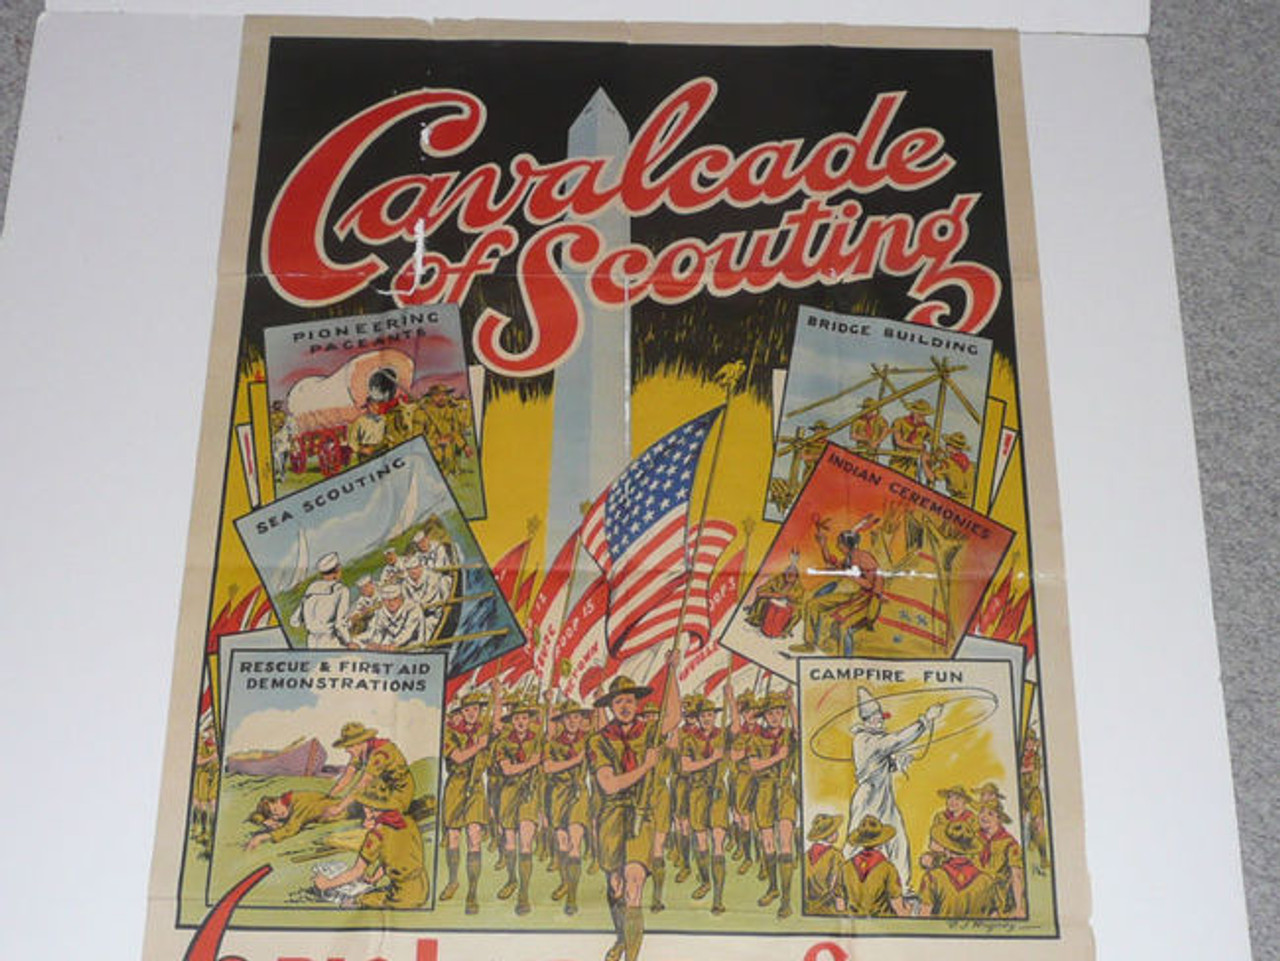 RARE 1937 Boy Scout National Jamboree "Cavalcade of Scouting" Shows Poster, professionally framed, some minor damage to poster but still incredible!